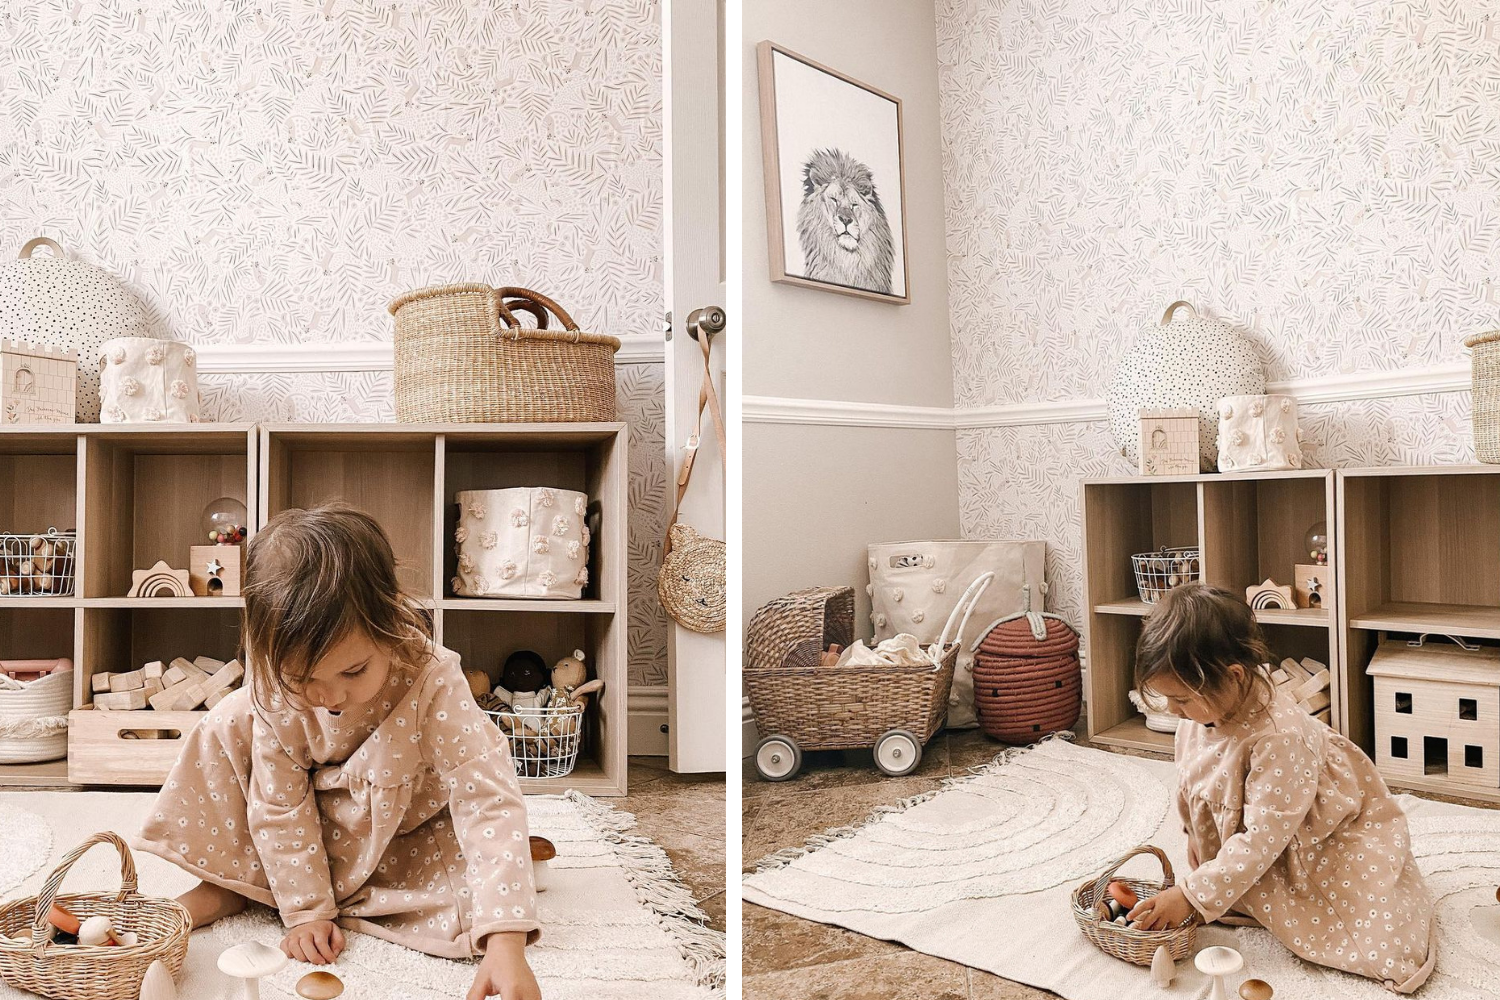 Toddler playing in a room with calming neutral wallpaper